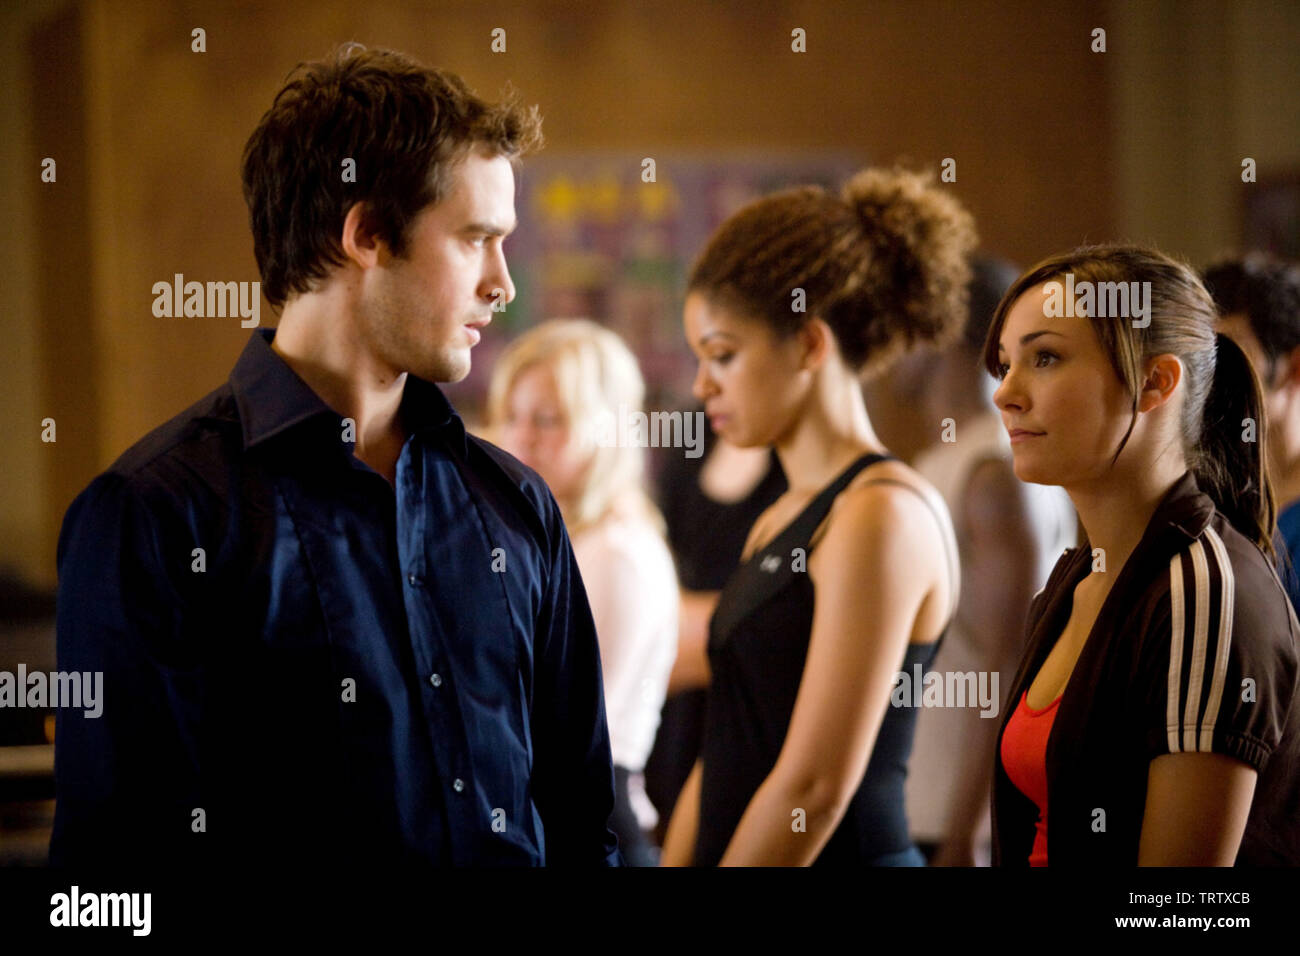 WILL KEMP and BRIANA EVIGAN in STEP UP 2: THE STREETS (2008). Copyright: Editorial use only. No merchandising or book covers. This is a publicly distributed handout. Access rights only, no license of copyright provided. Only to be reproduced in conjunction with promotion of this film. Credit: OFFSPRING ENTERTAINMENT/SUMMIT ENTERTAINMENT/TOUCHSTONE PICT / BALLARD, KAREN / Album Stock Photo